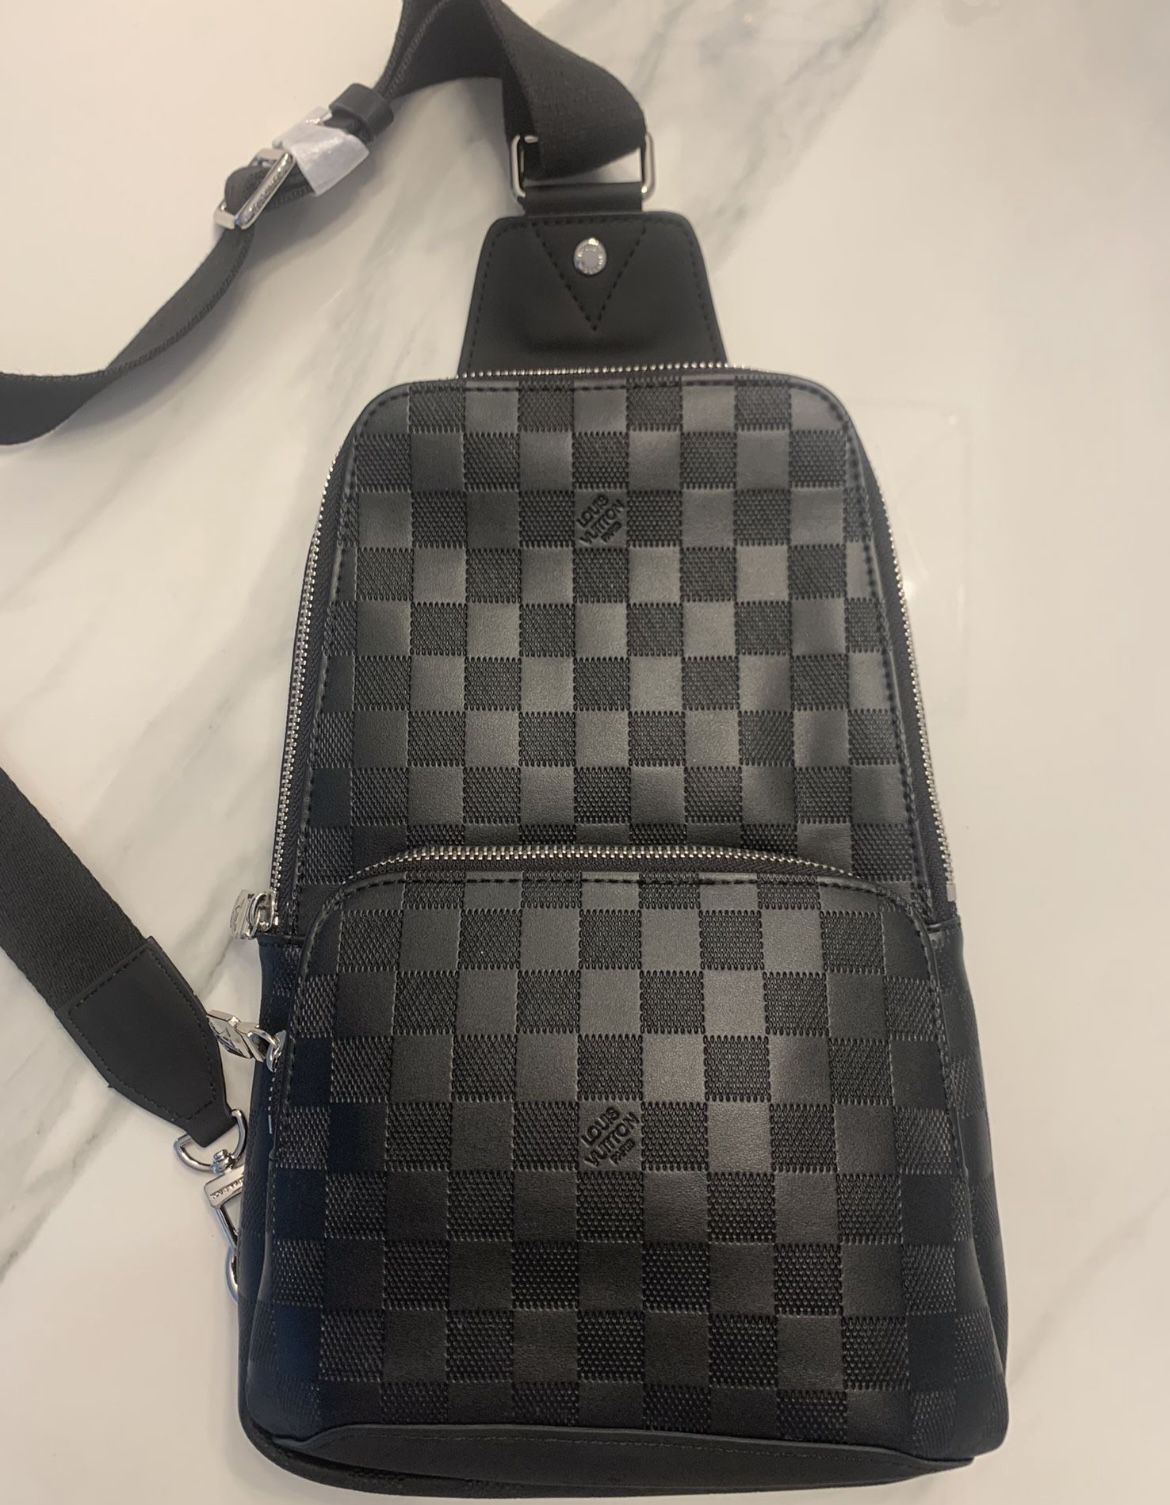 Louis Vuitton Vernis Two Way Bag for Sale in Honolulu, HI - OfferUp